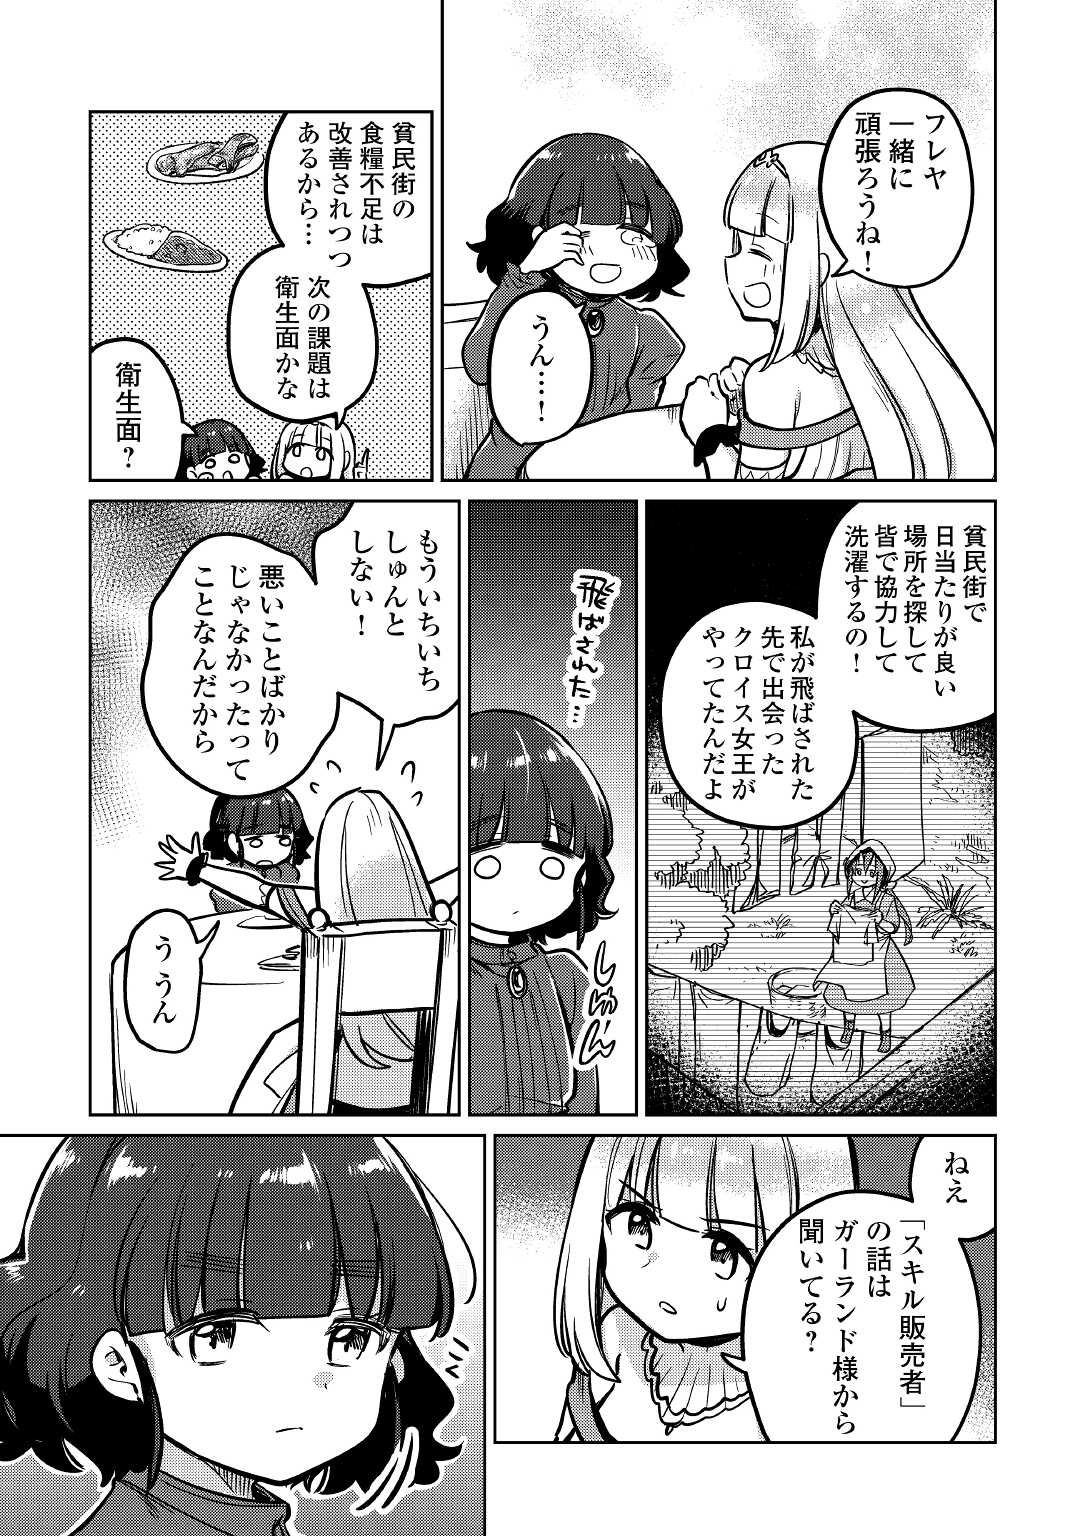 The Former Structural Researcher’s Story of Otherworldly Adventure 第42話 - Page 17